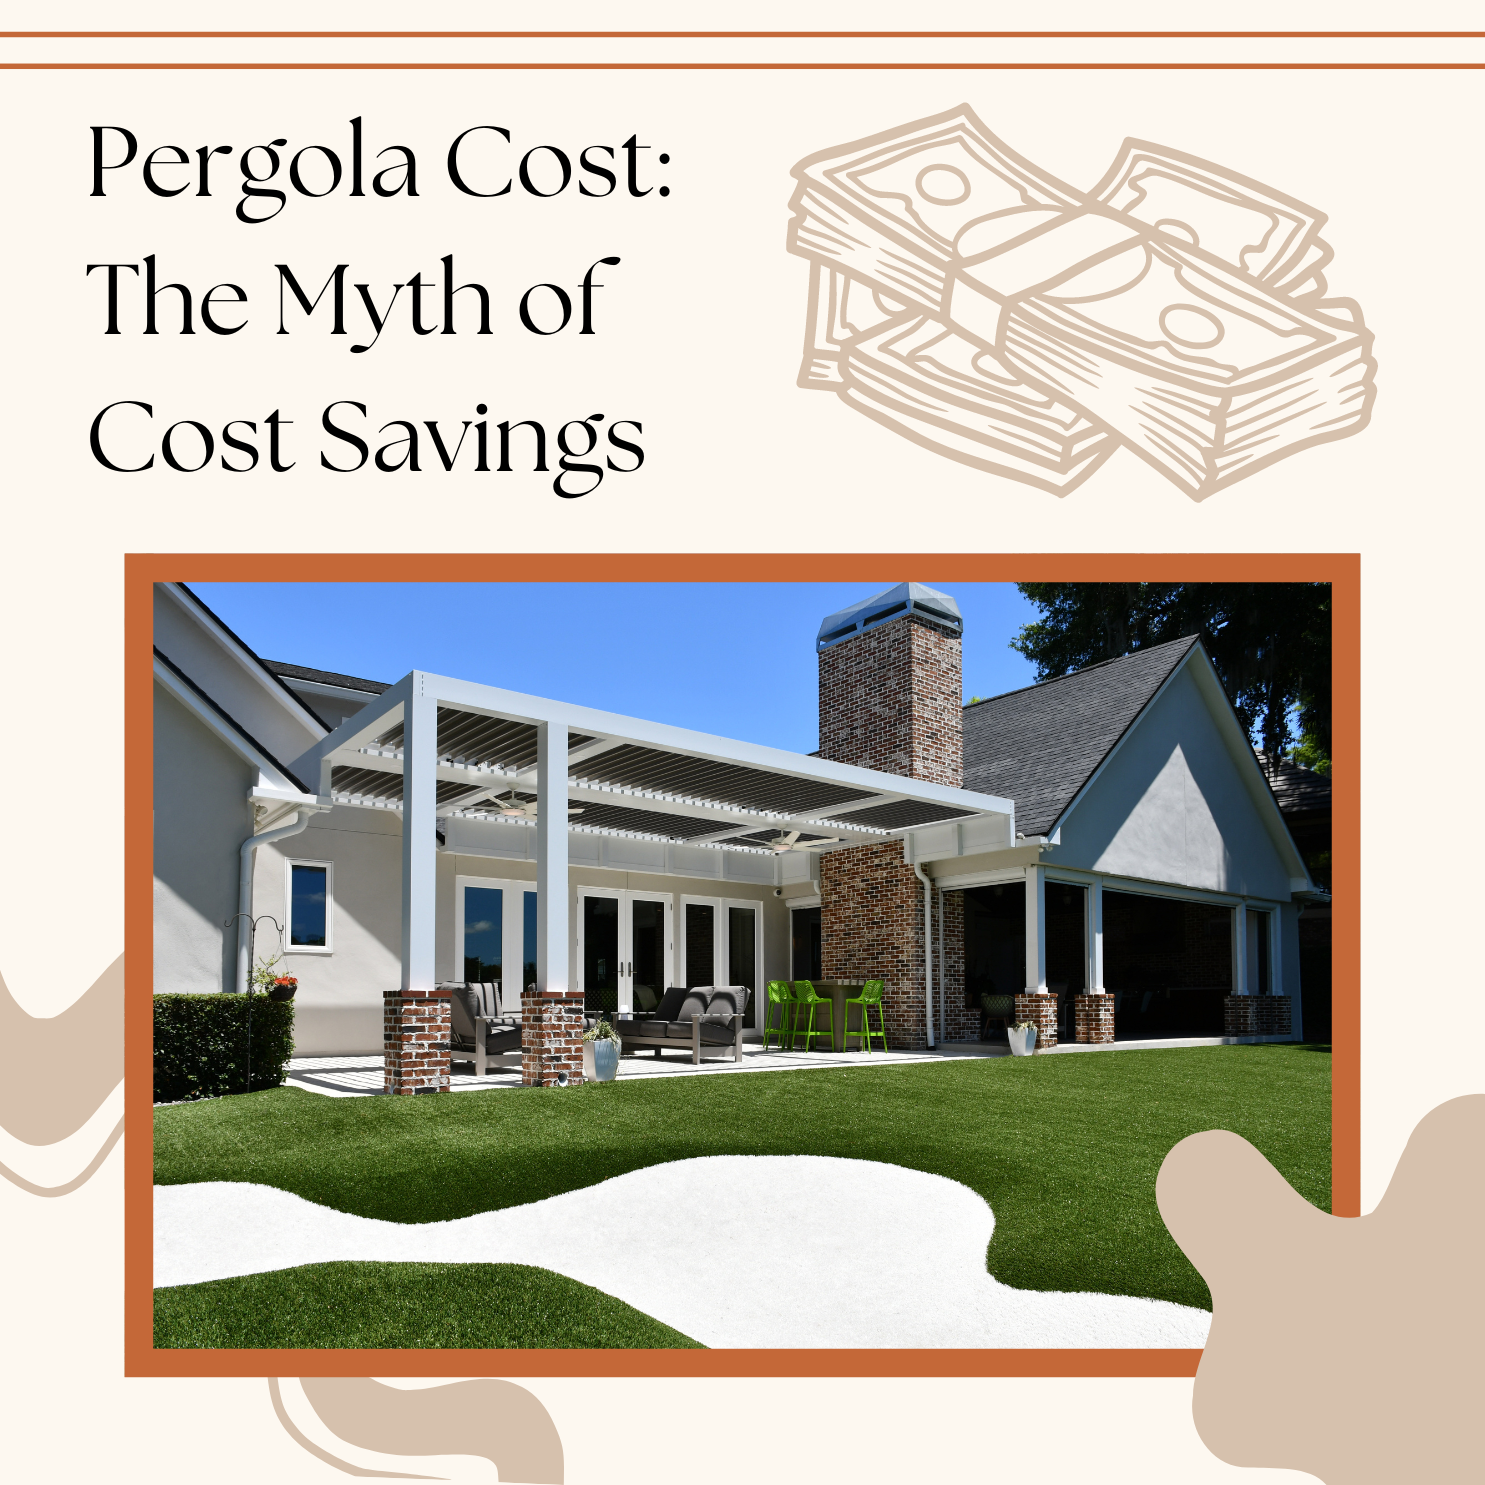 Featured image for “Pergola Cost: The Myth of Cost Savings”